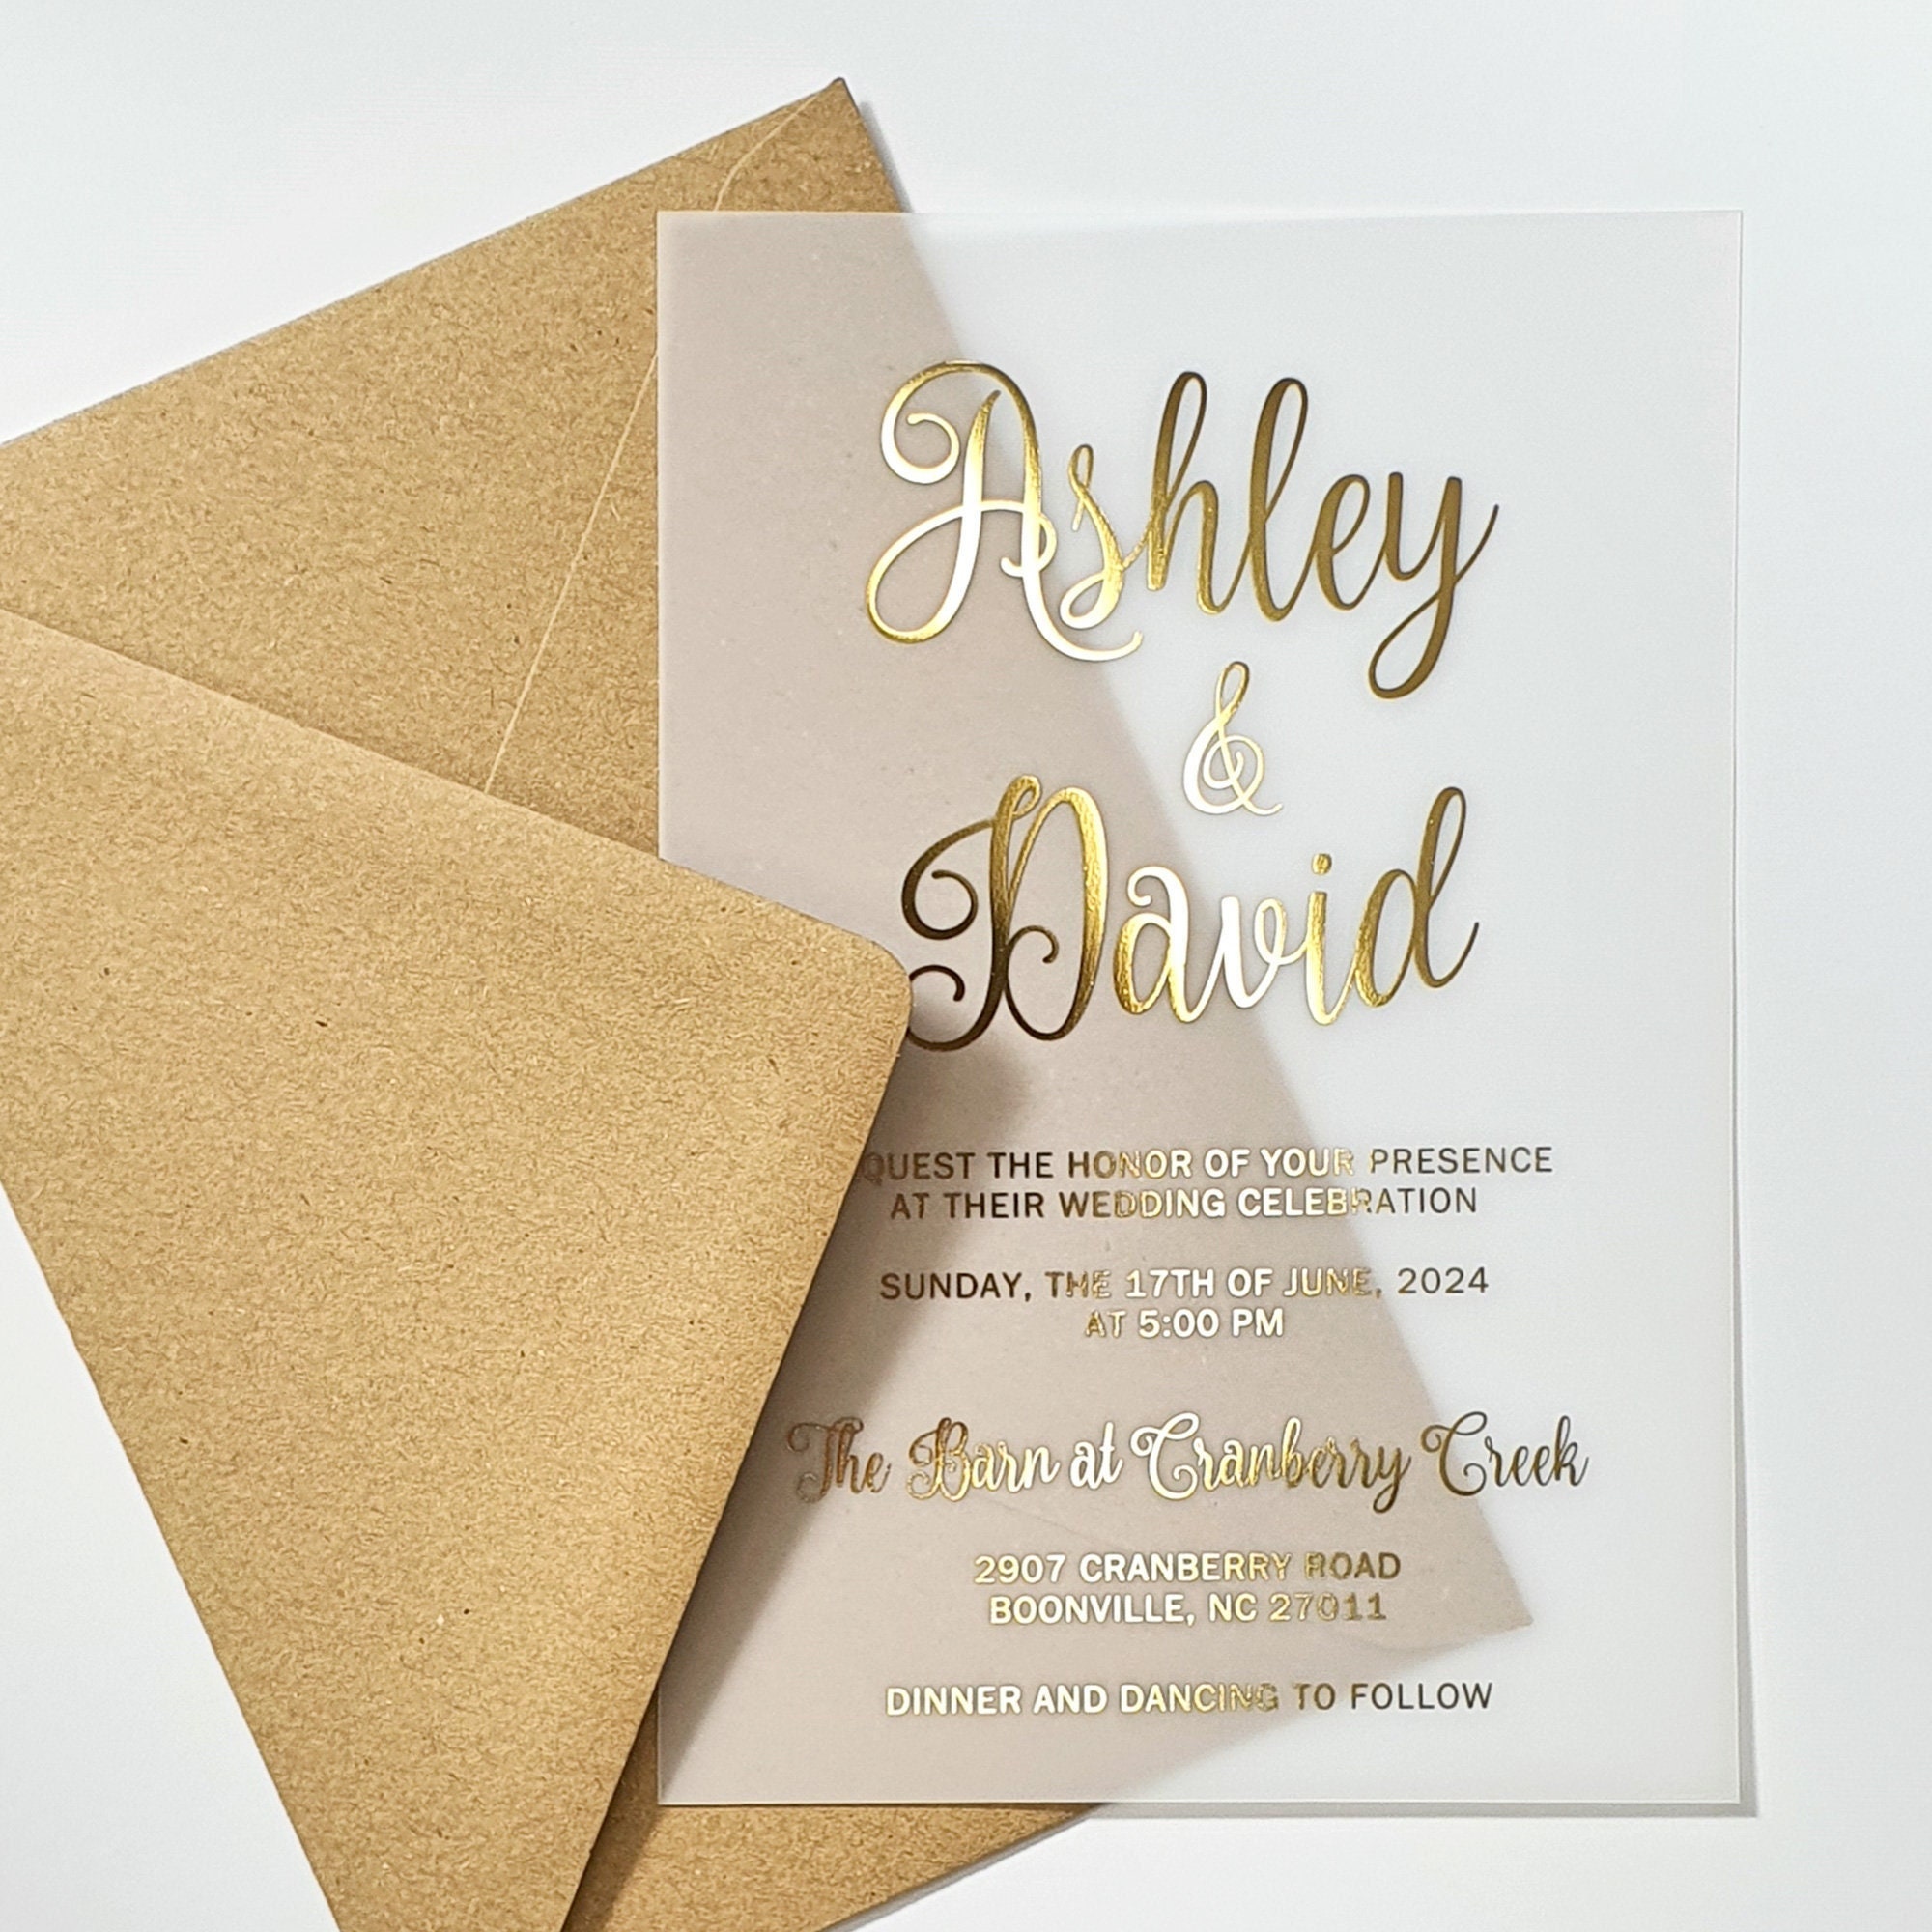  Clear Acrylic Wedding Invitation with Gold Foil. Luxury Vellum  Invite, Black or White Cardstock with Rose Gold, Silver or Holographic Foil  - Set of 10 : Handmade Products